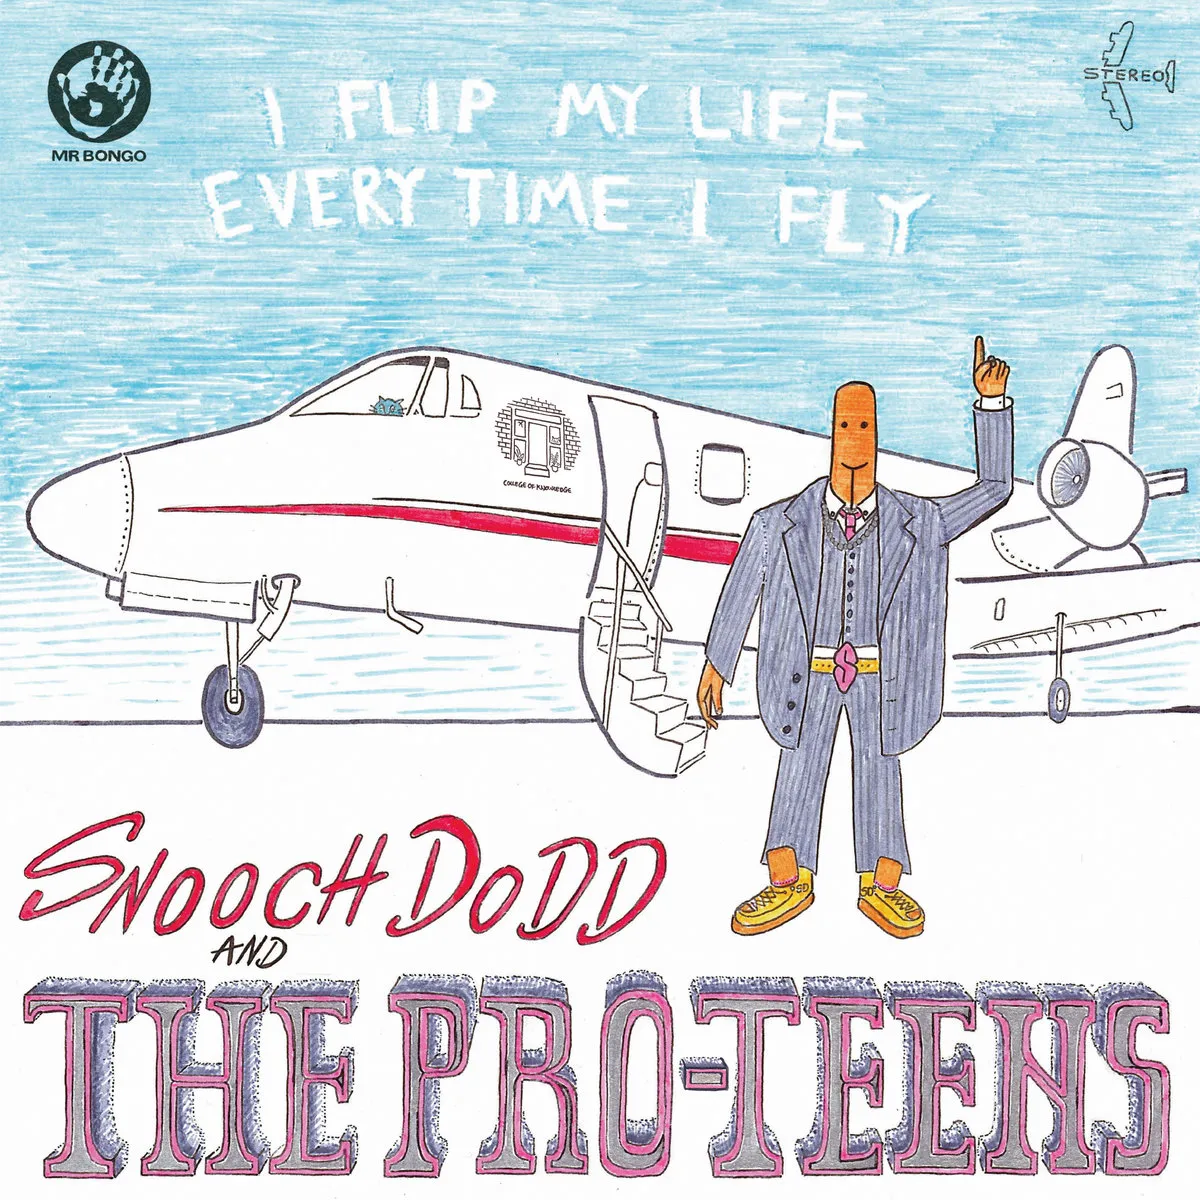 Snooch Dodd and The Pro-Teens - I Flip My Life Every Time I Fly : LP